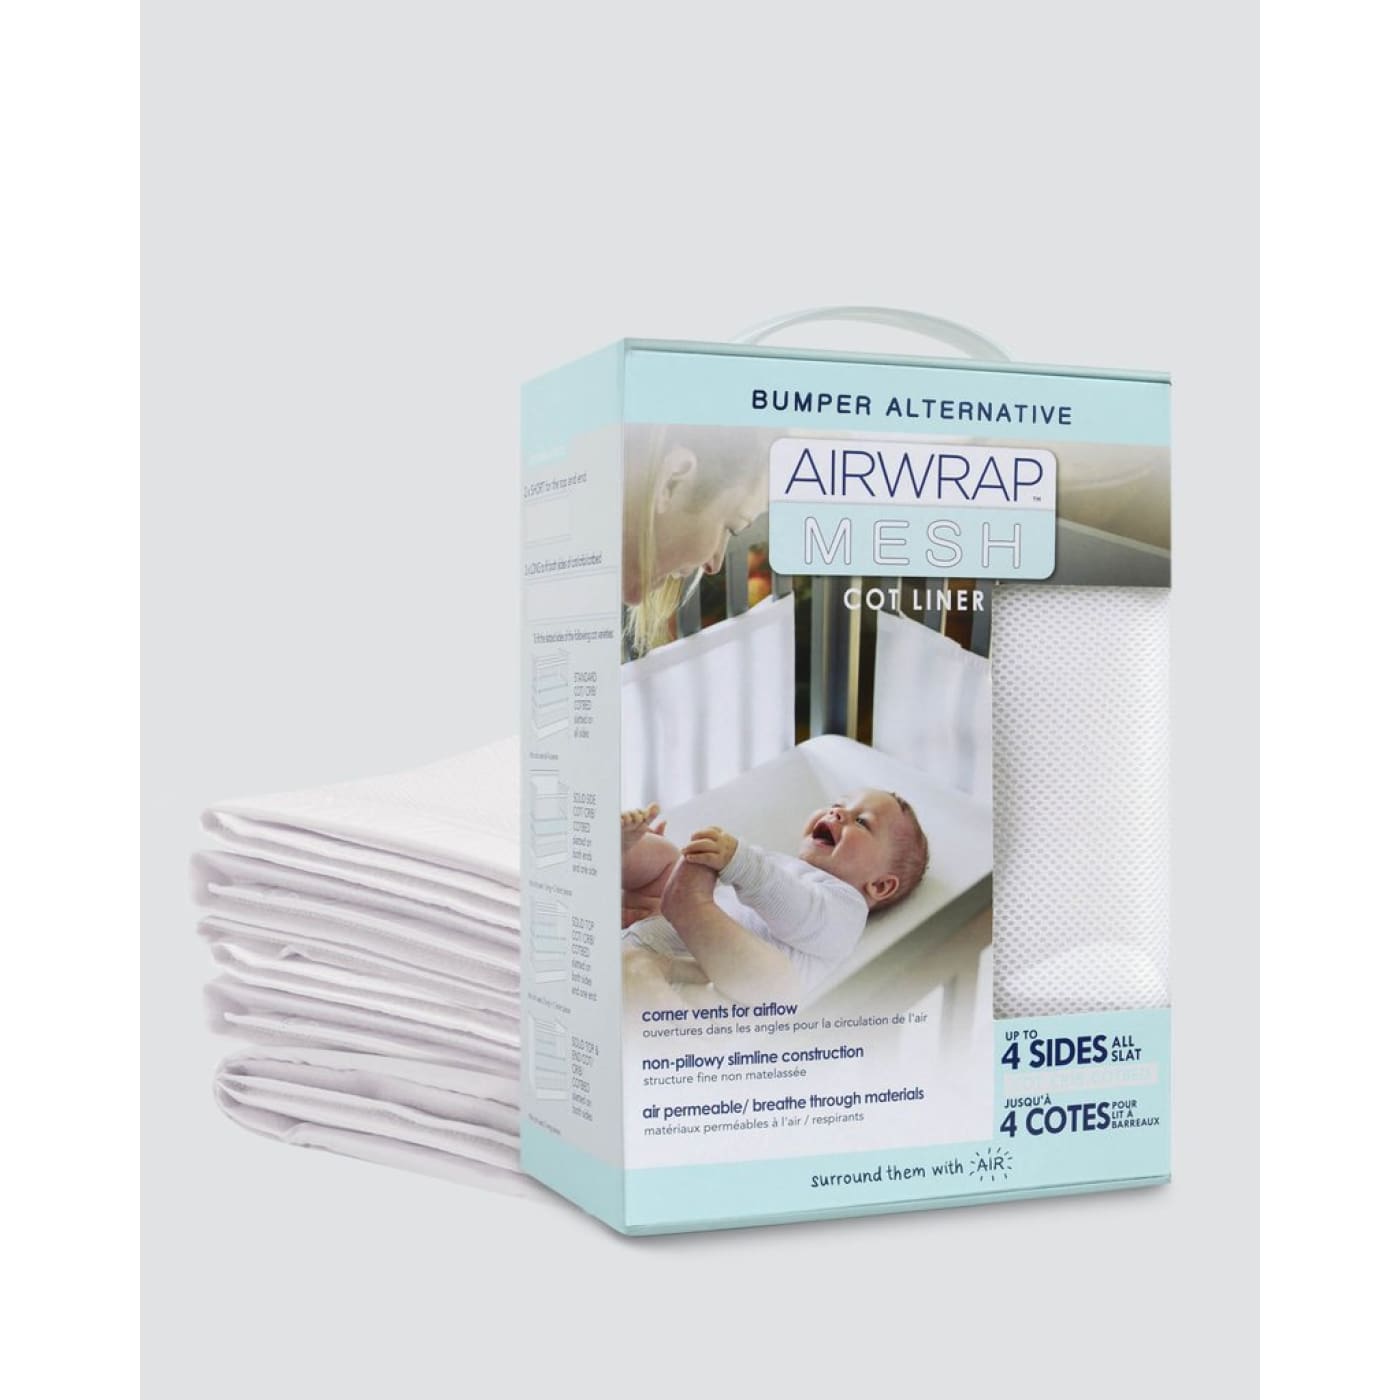 Airwrap Mesh Cot Liner 4 Sides - White - White - NURSERY & BEDTIME - COT BUMPERS